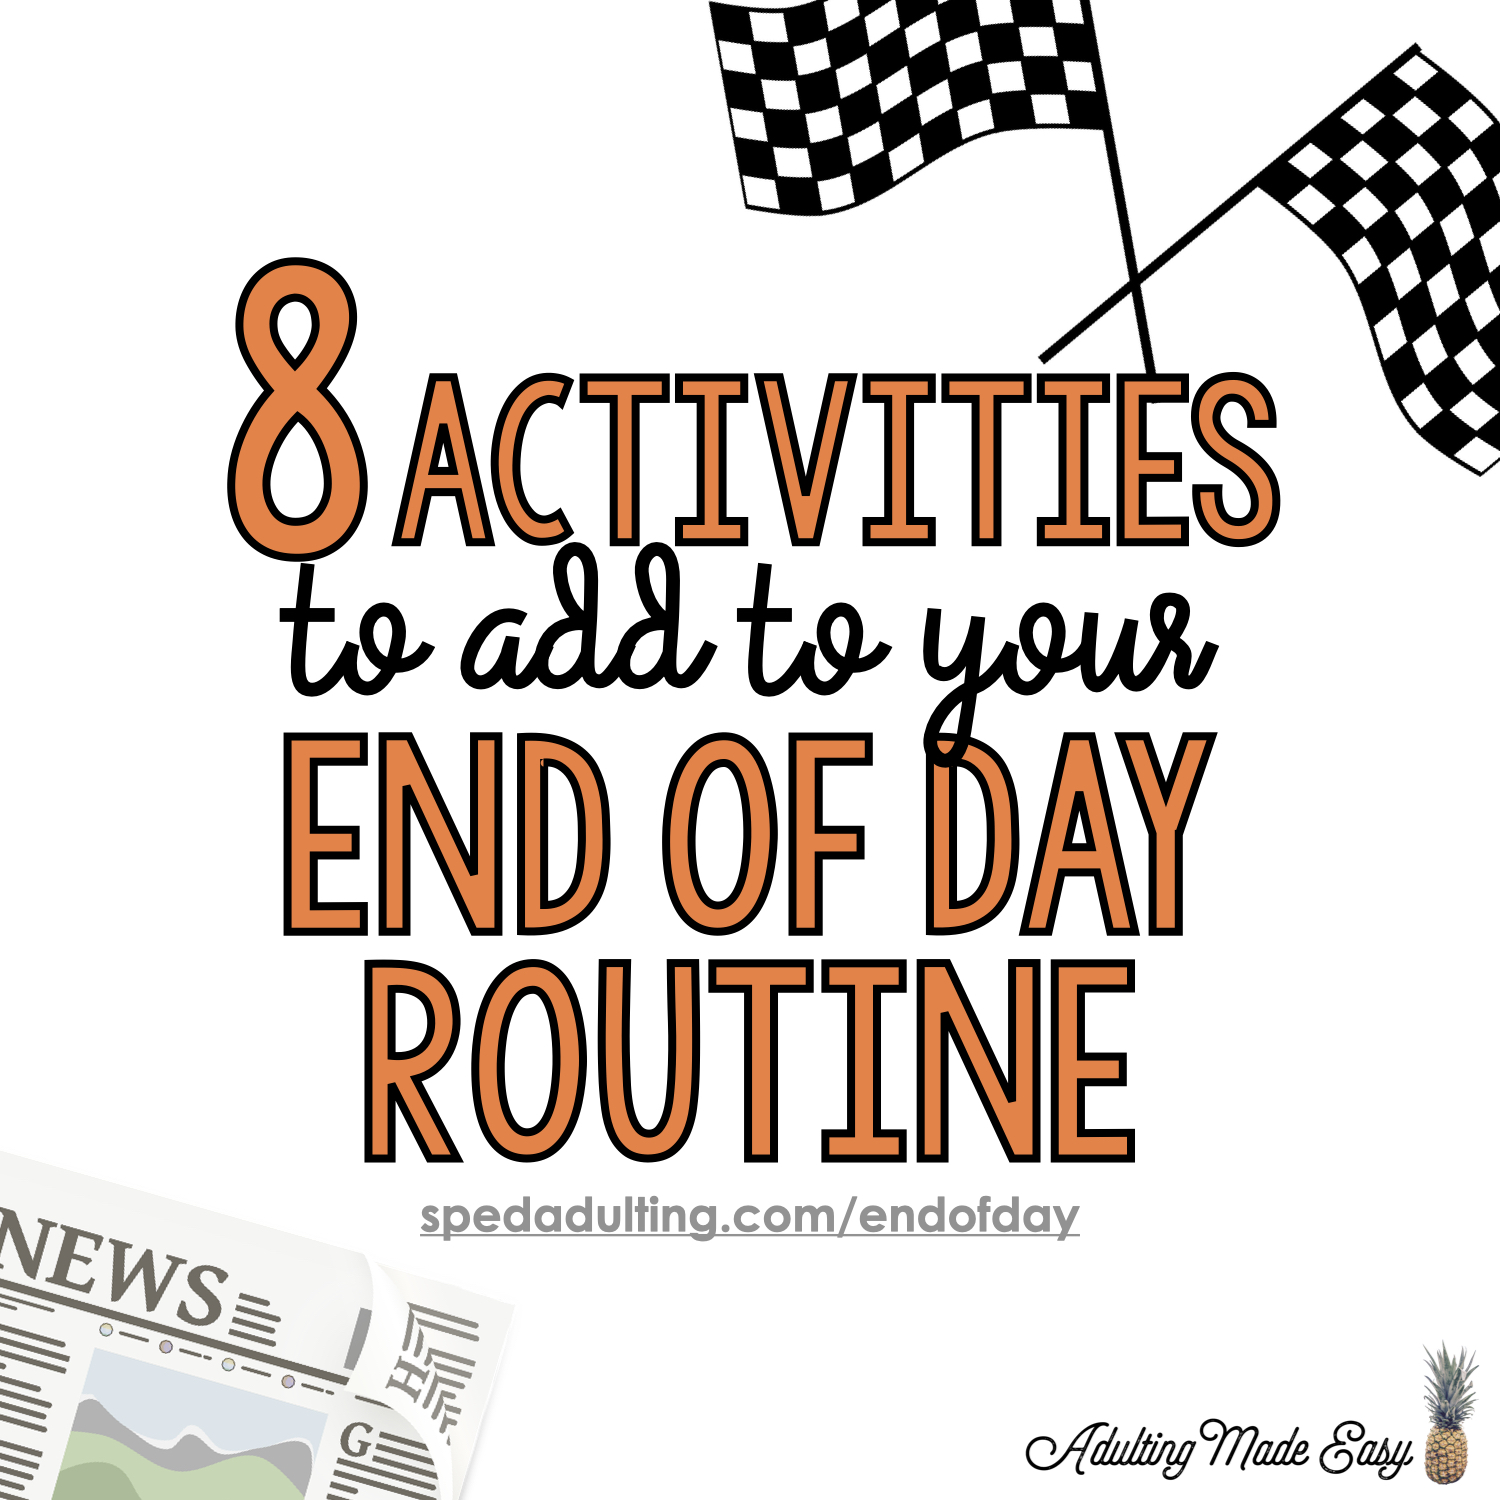 BLOG: 8 Activities to add to your end of day routine.